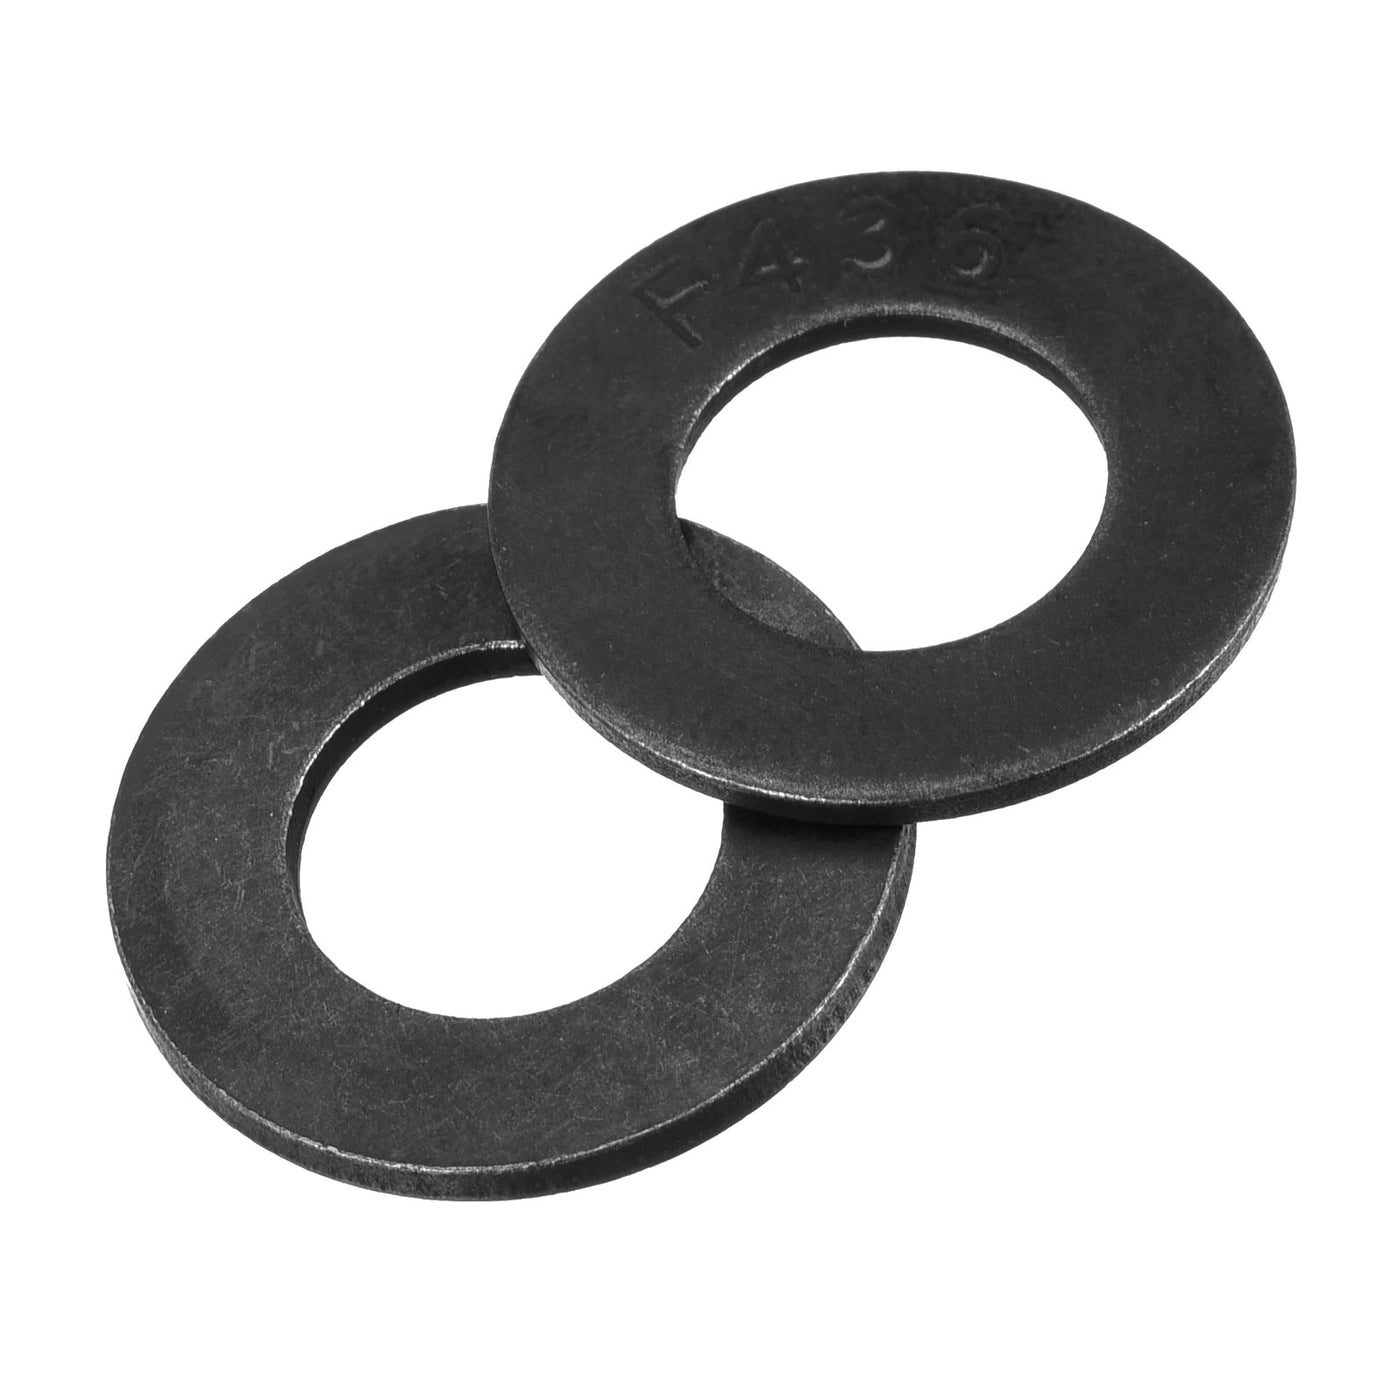 uxcell Uxcell 7/16-Inch Flat Washer, Alloy Steel Black Oxide Finish Pack of 50